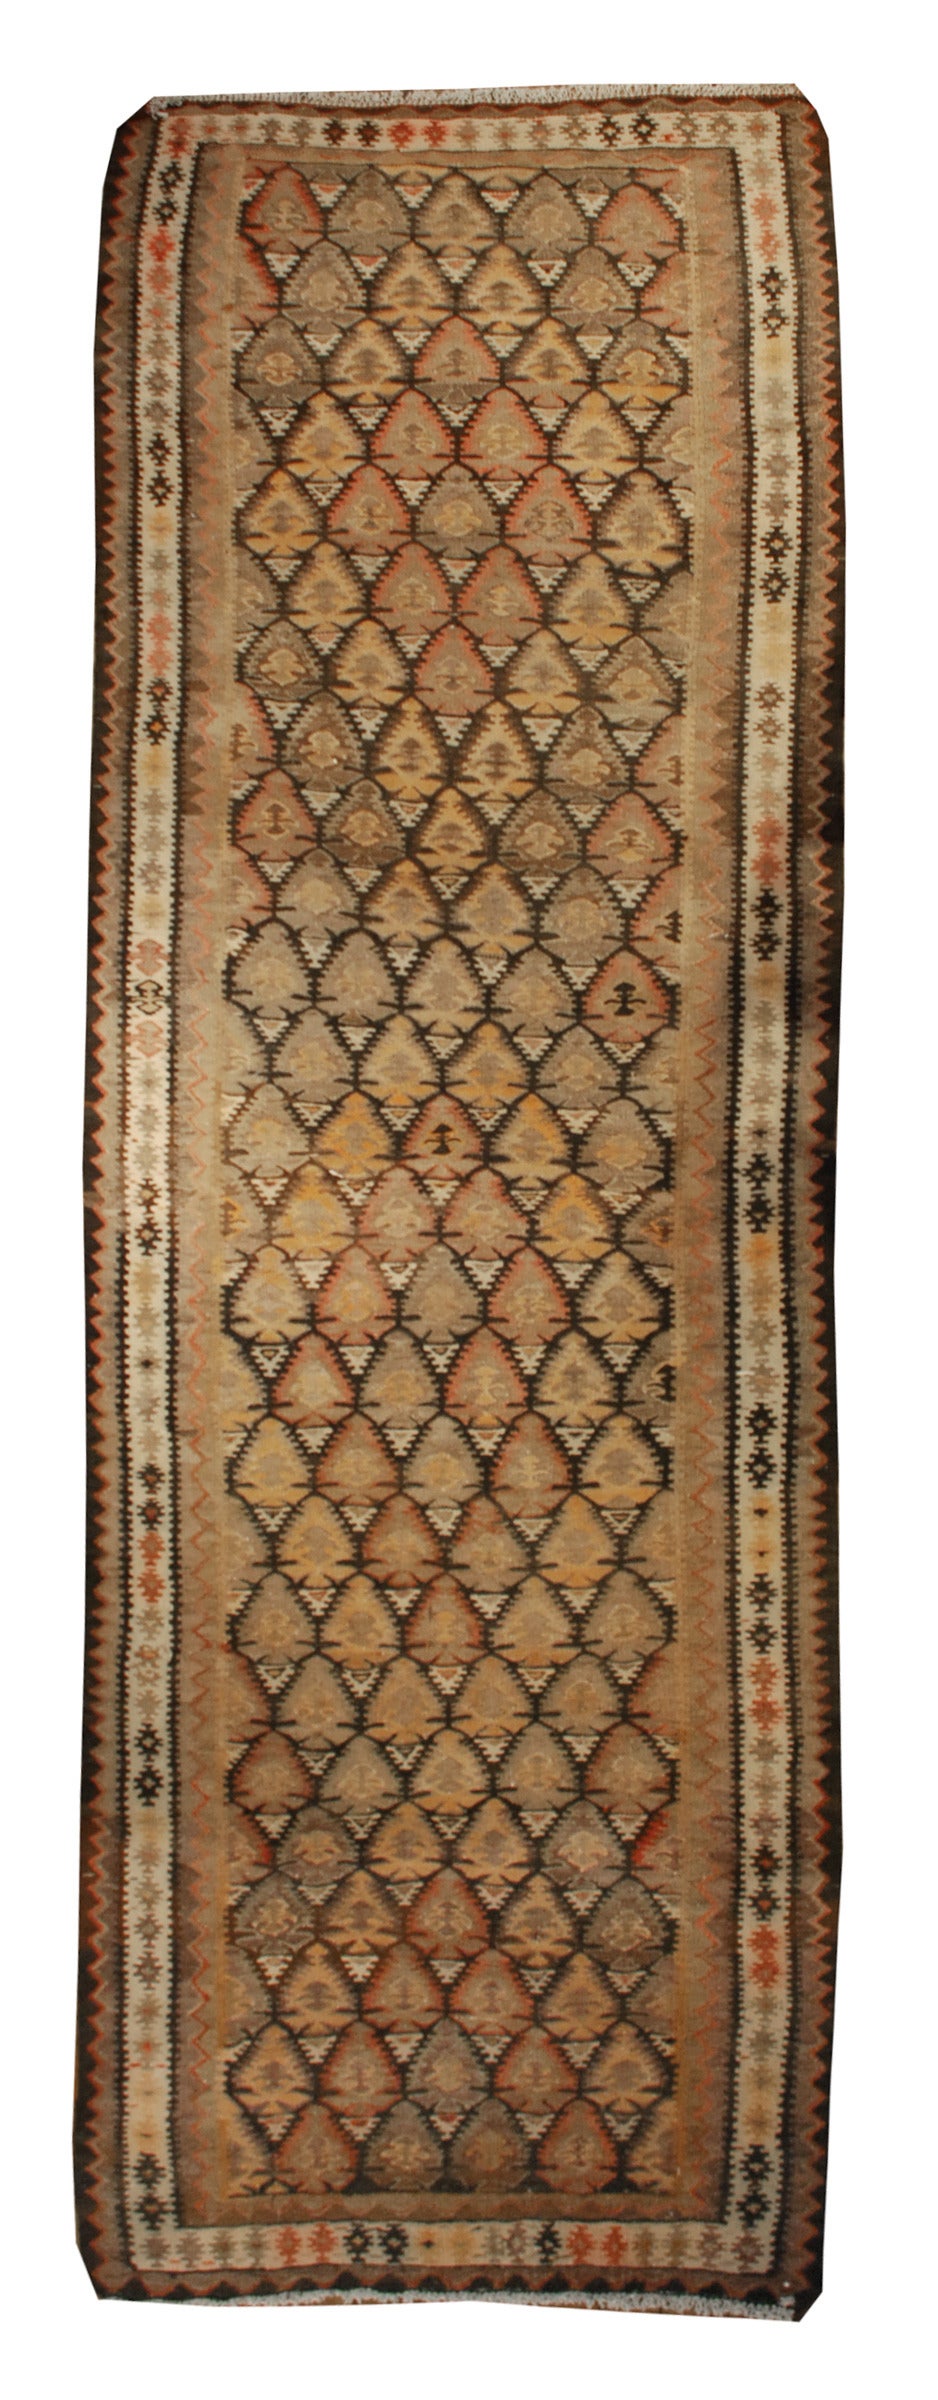 An early 20th century Persian Qazvin Kilim runner with a beautifully woven tree-of-life pattern, surrounded by multiple complementary geometric borders.